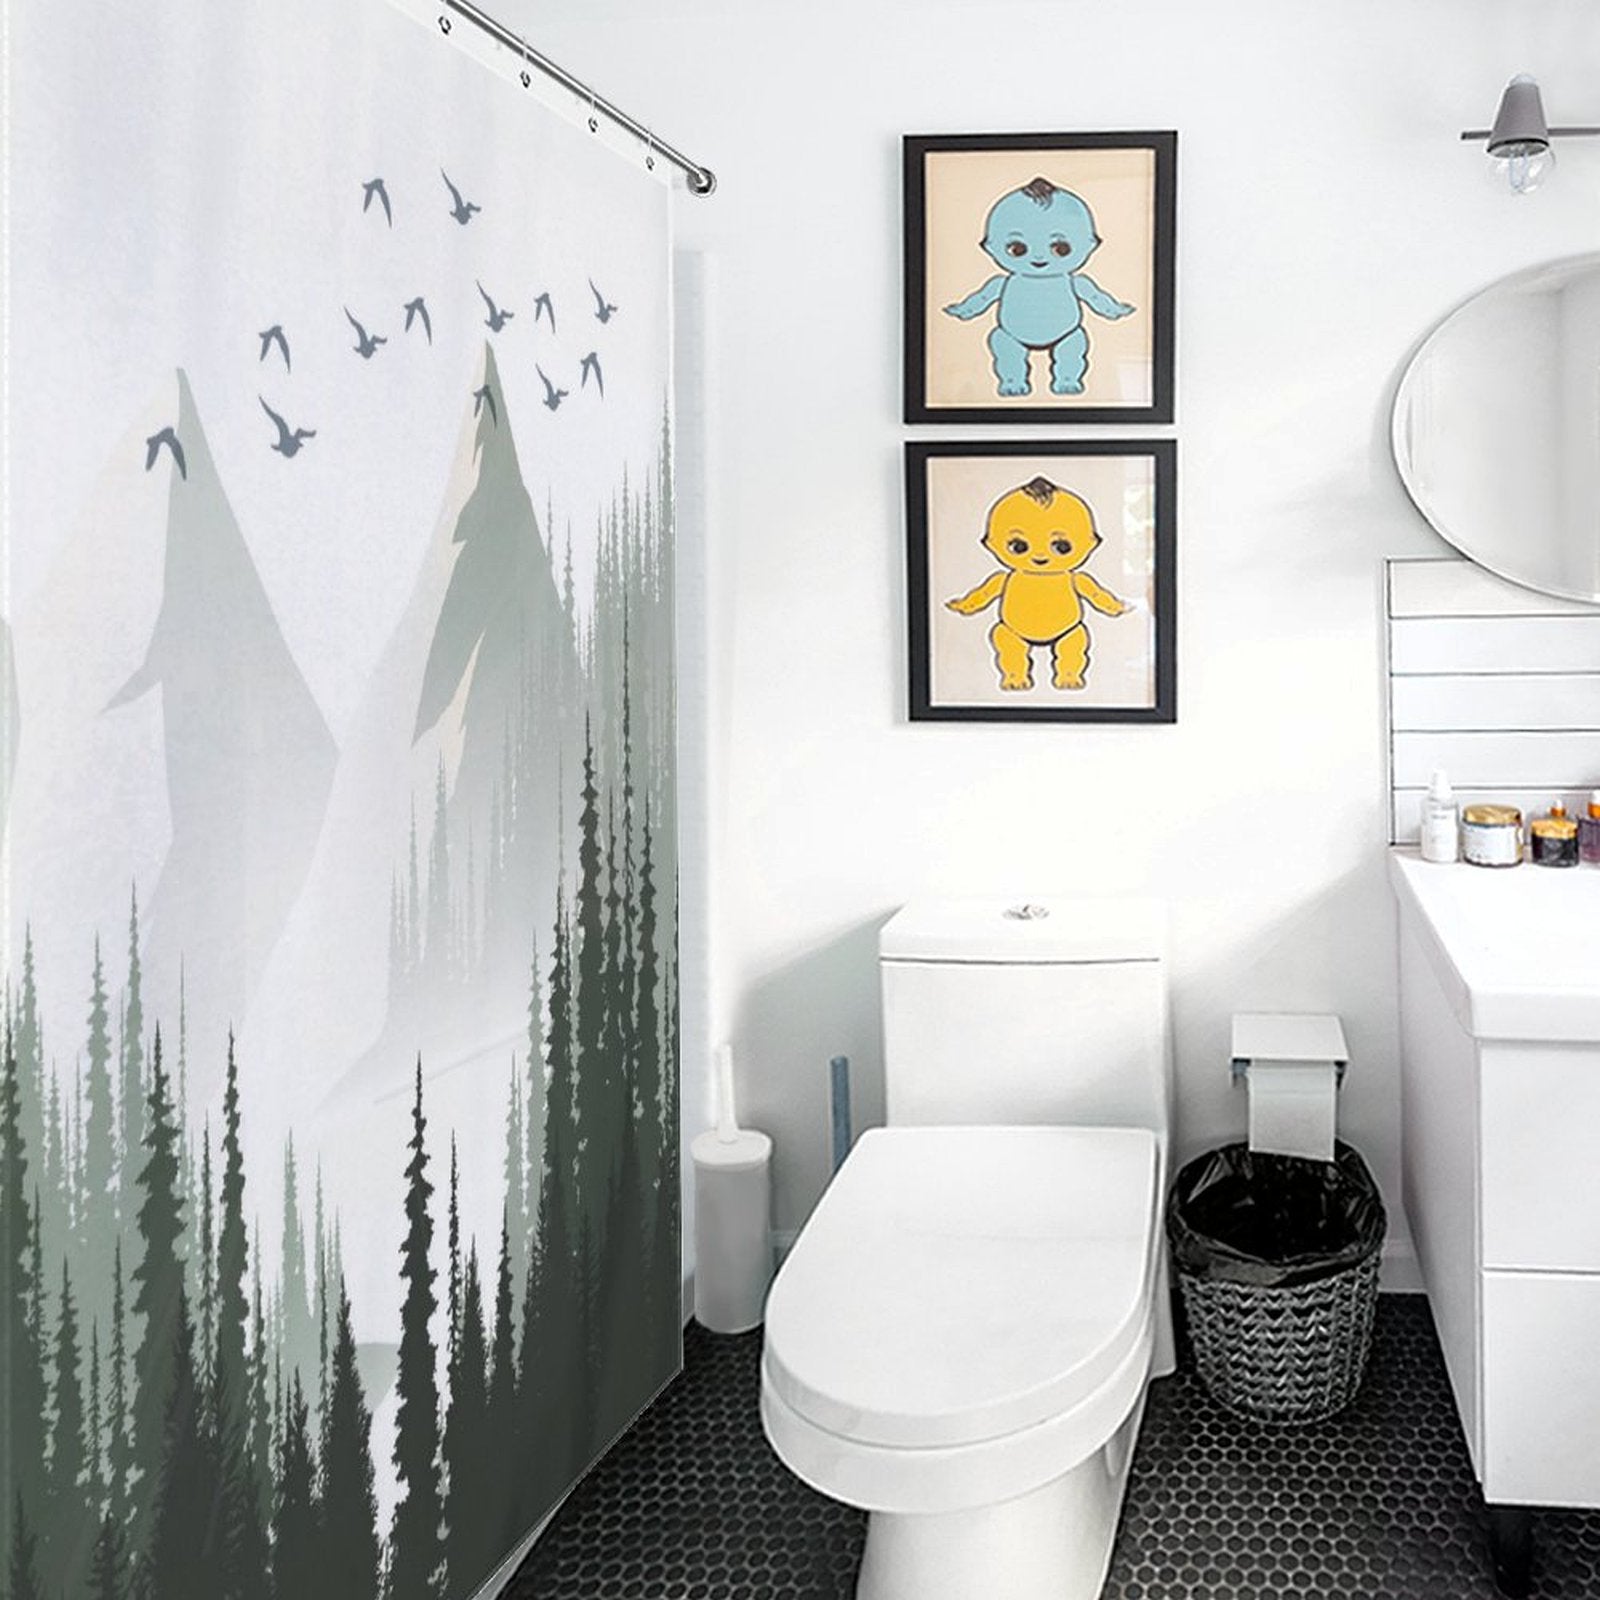 A modern bathroom with a Green Misty Forest Shower Curtain Ombre Sage Green White Nature Tree Mountain Woodland-Cottoncat by Cotton Cat, two framed pictures of cartoon characters above the toilet, white vanity, mirror, and black hexagonal floor tiles. This tranquil bathroom decor creates a serene ambiance perfect for unwinding.